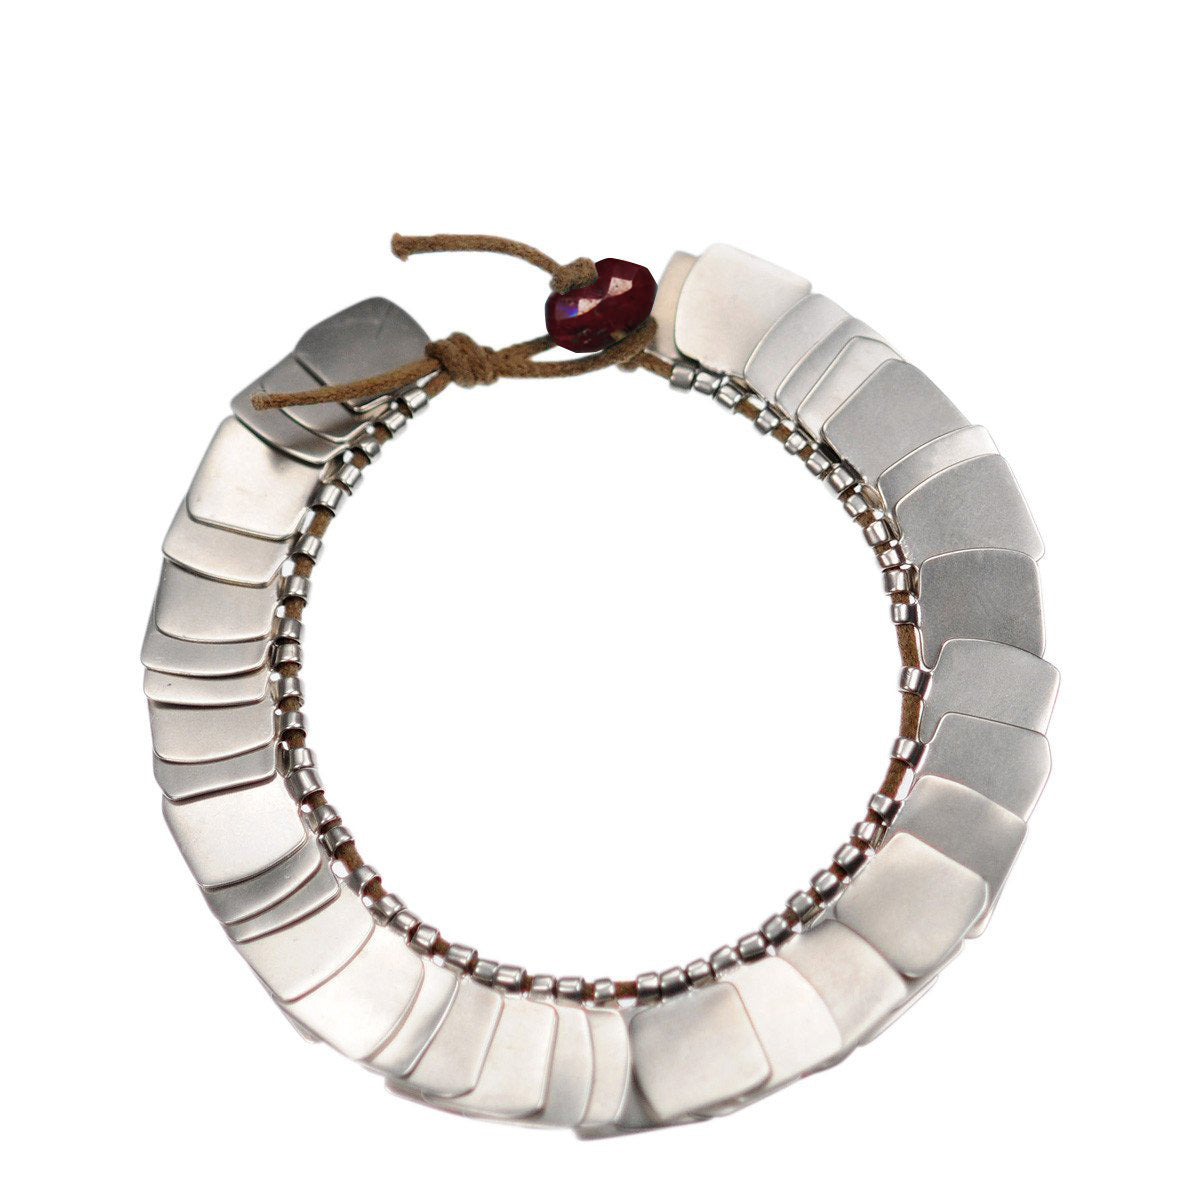 Sterling Silver Full Flattened Metal Bracelet on Cord with Ruby Bead Closure